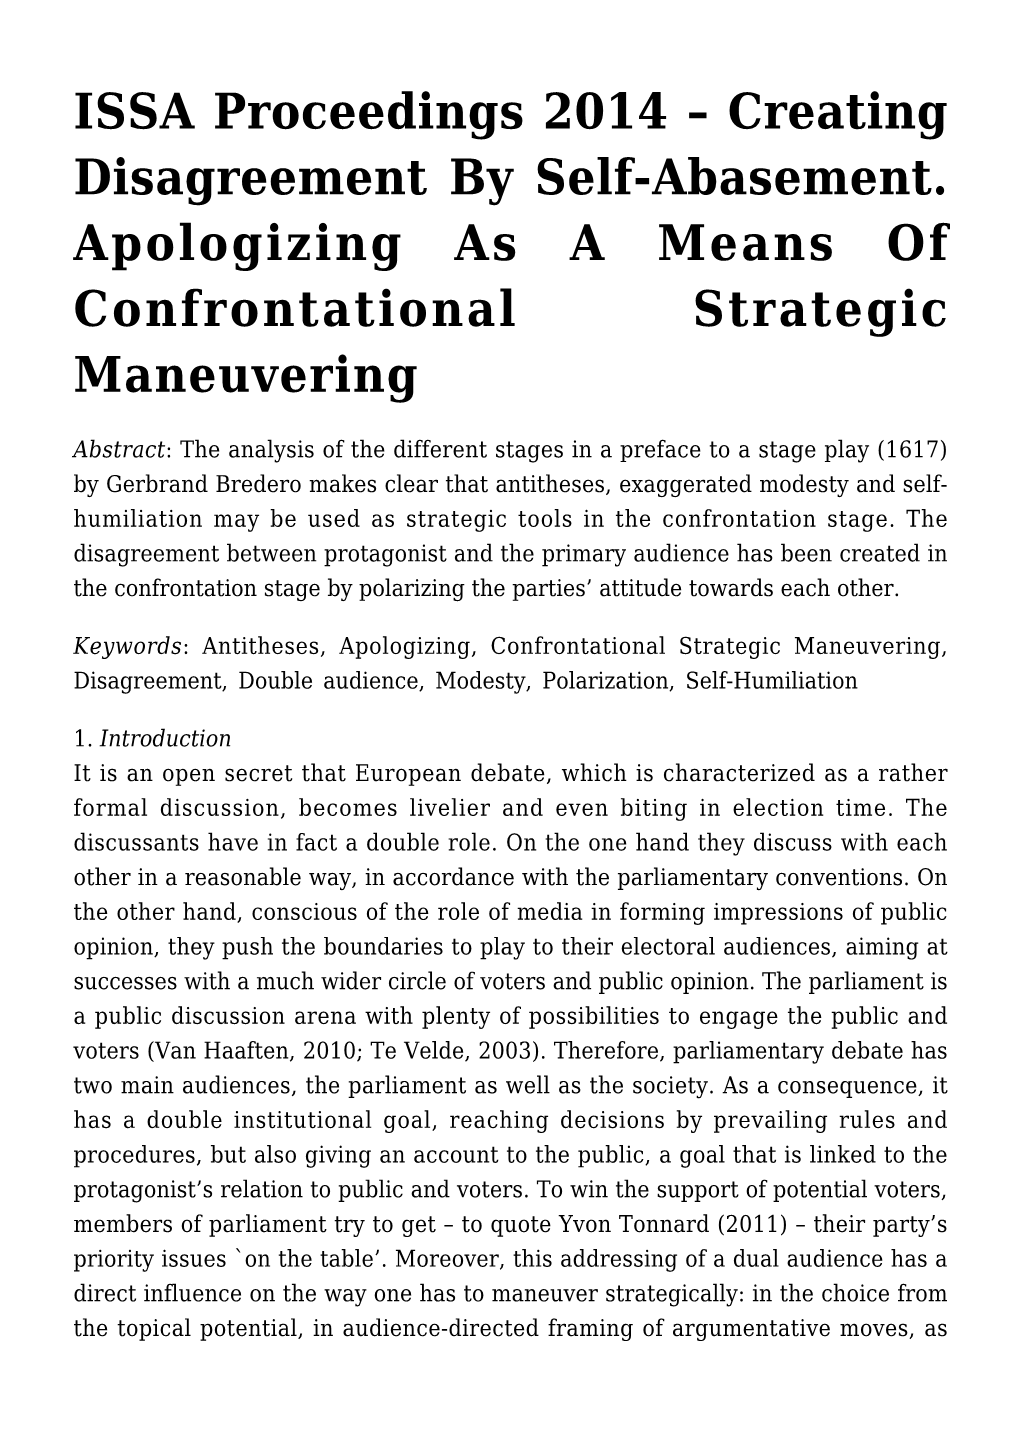 Creating Disagreement by Self-Abasement. Apologizing As a Means of Confrontational Strategic Maneuvering